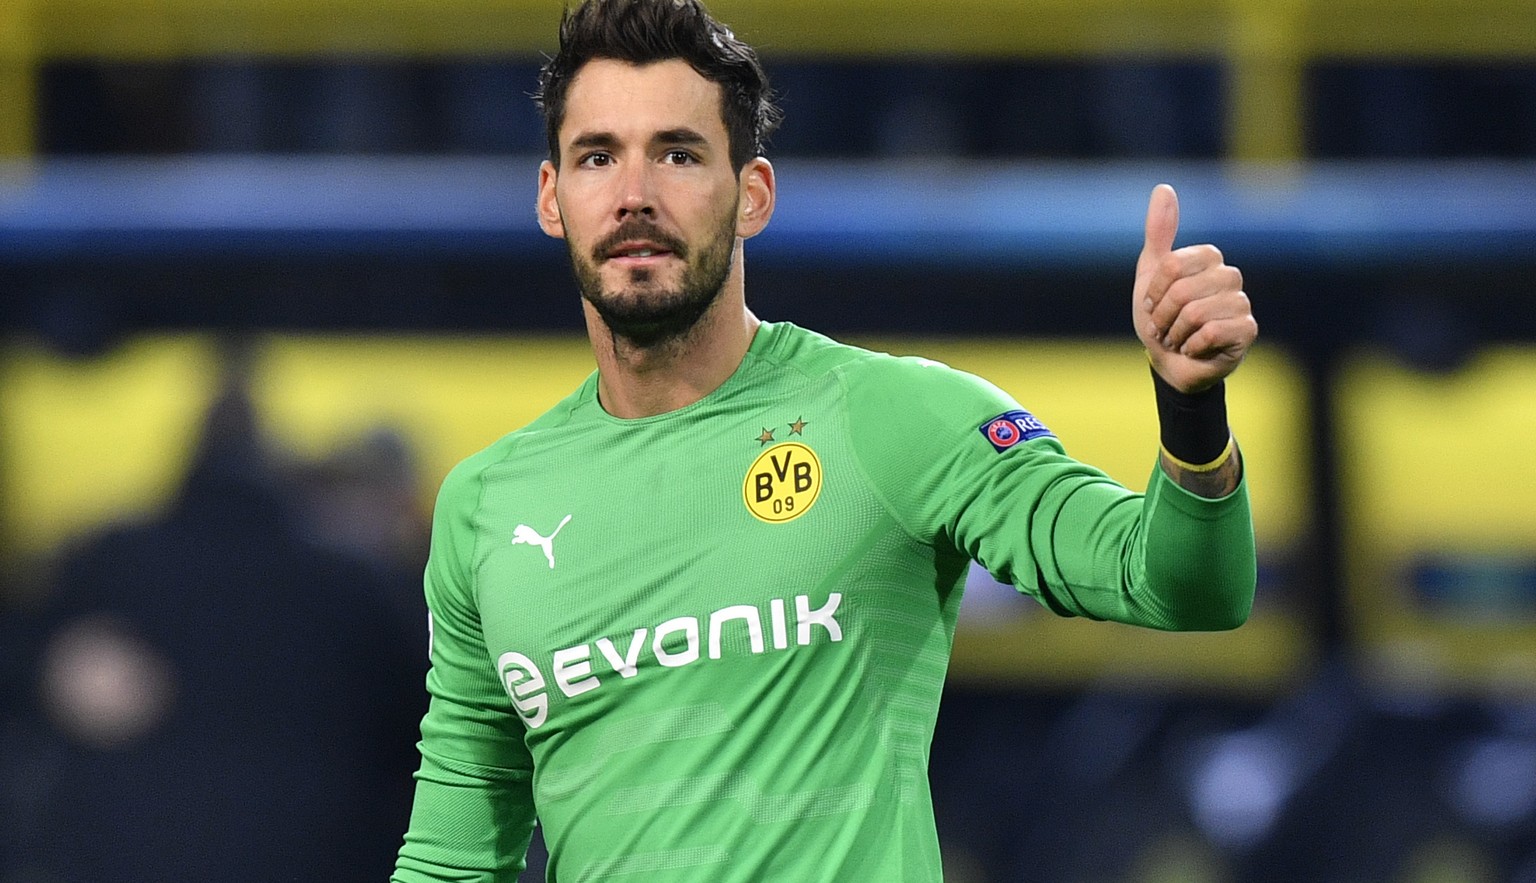 Dortmund goalkeeper Roman Buerki gestures to supporters after the Champions League group A soccer match between Borussia Dortmund and Club Brugge in Dortmund, Germany, Wednesday, Nov. 28, 2018. (AP Ph ...